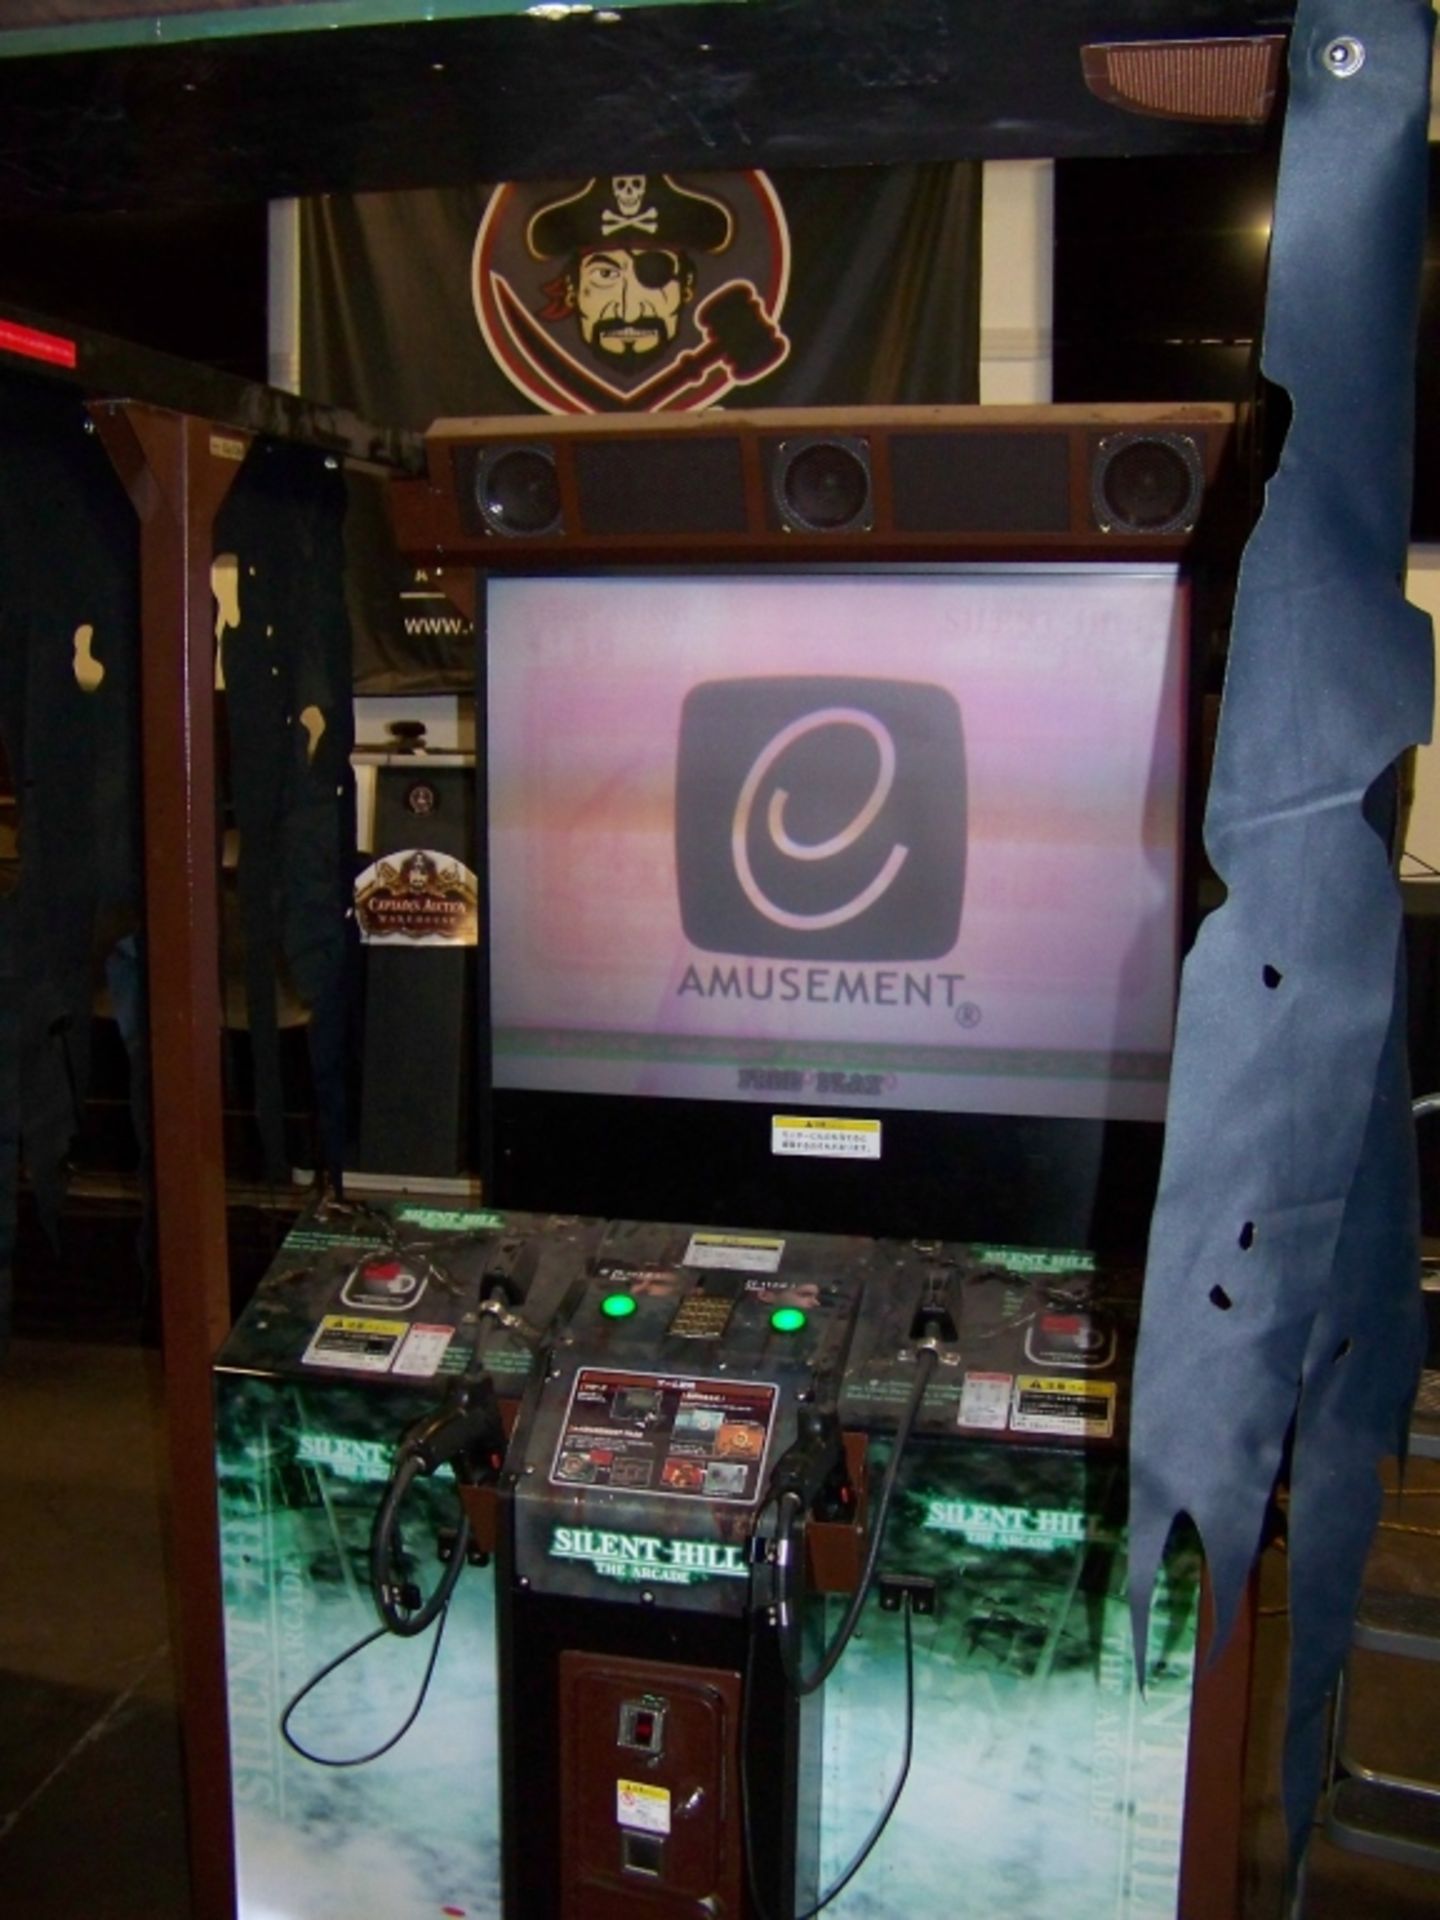 SILENT HILL DX SHOOTER ZOMBIE KONAMI ARCADE GAME - Image 7 of 7